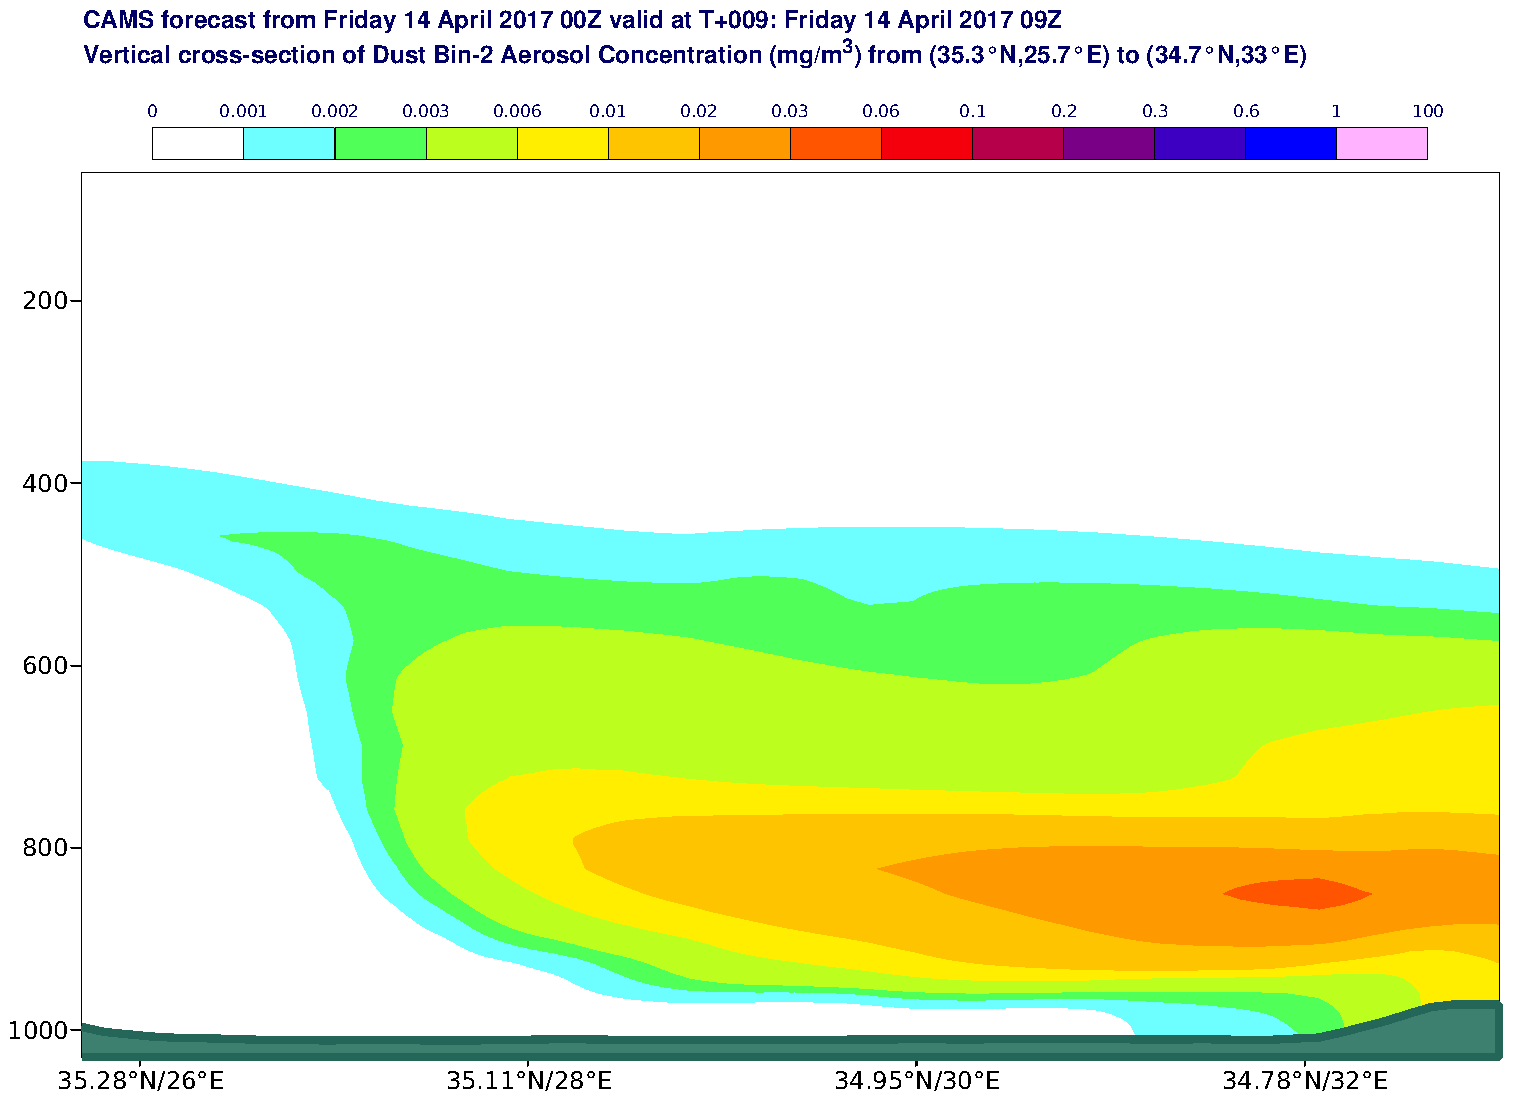 Vertical cross-section of Dust Bin-2 Aerosol Concentration (mg/m3) valid at T9 - 2017-04-14 09:00